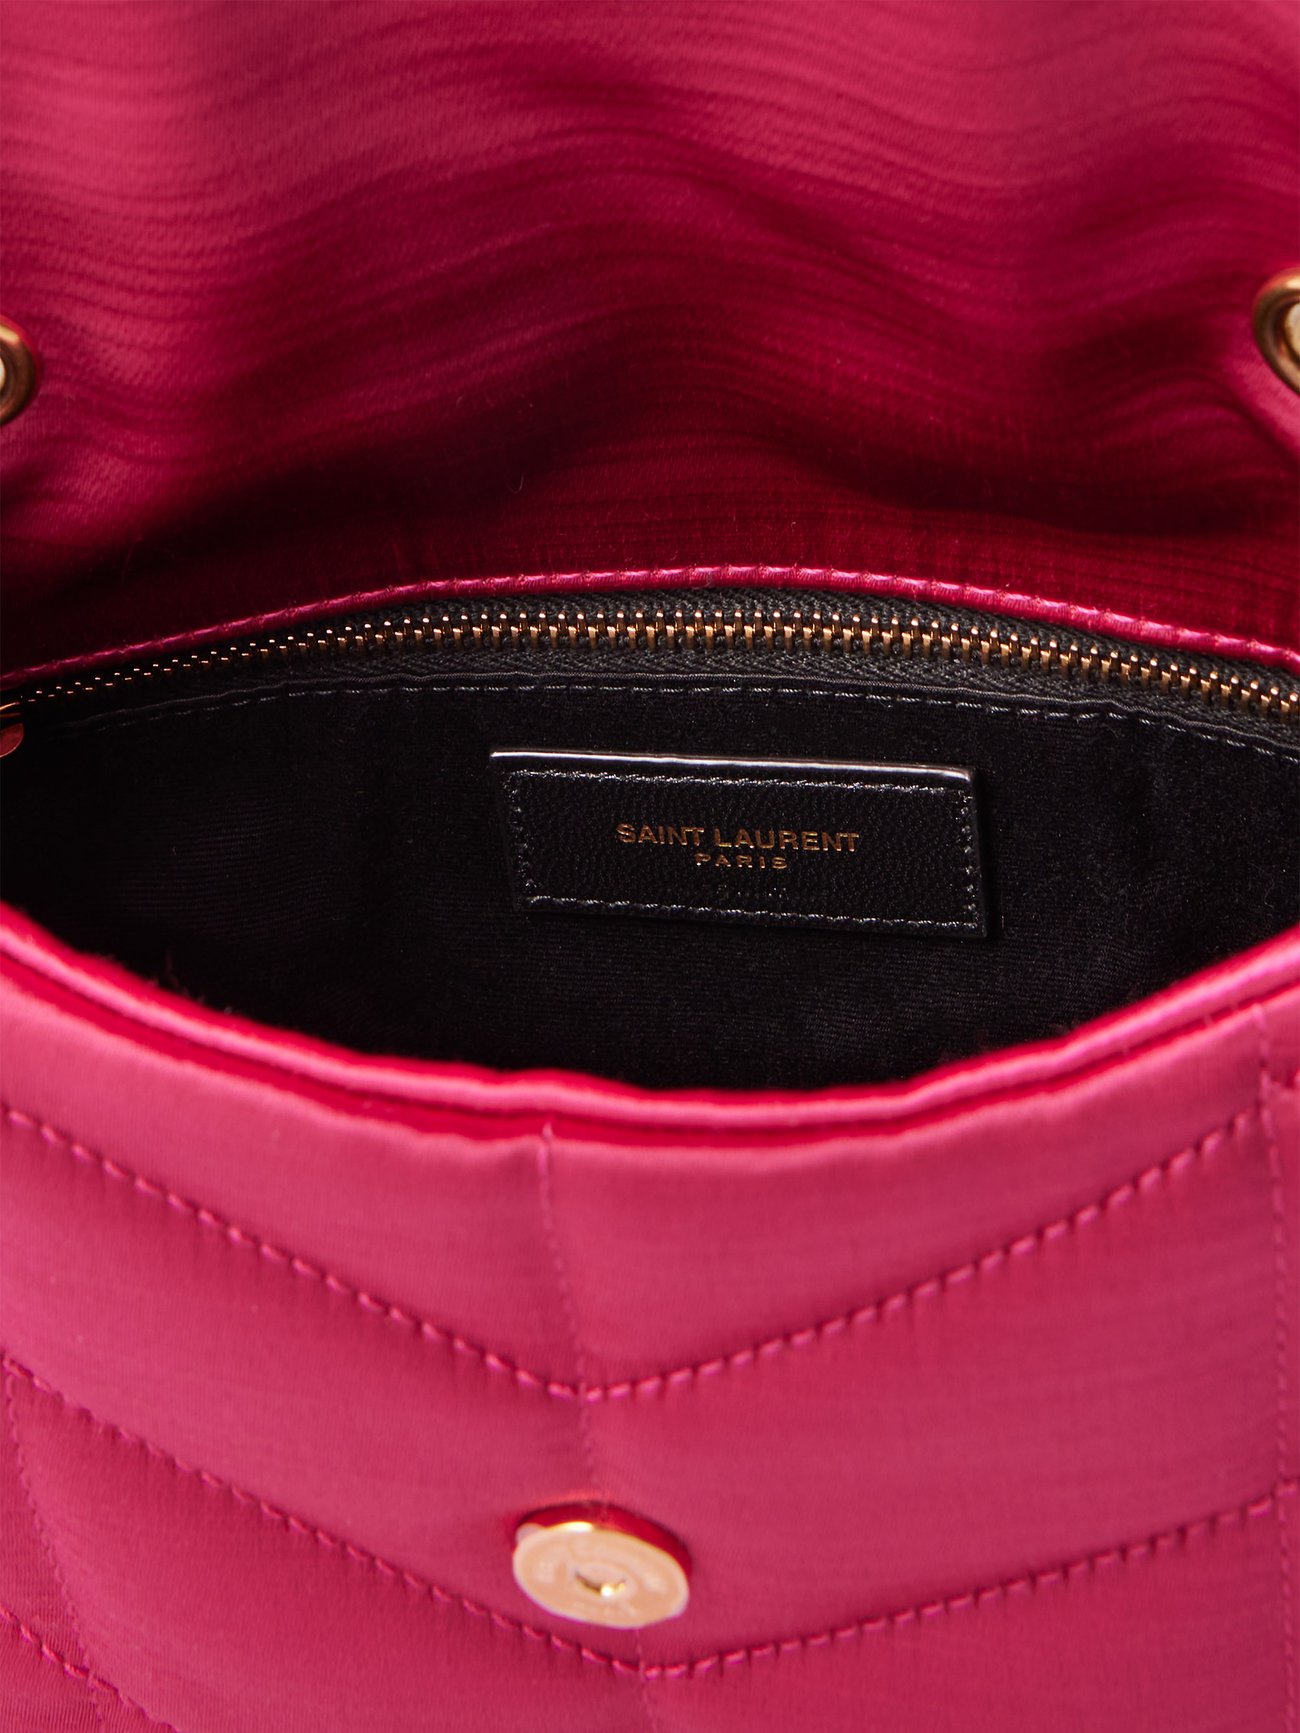 Saint Laurent Loulou Toy Bag in Pink